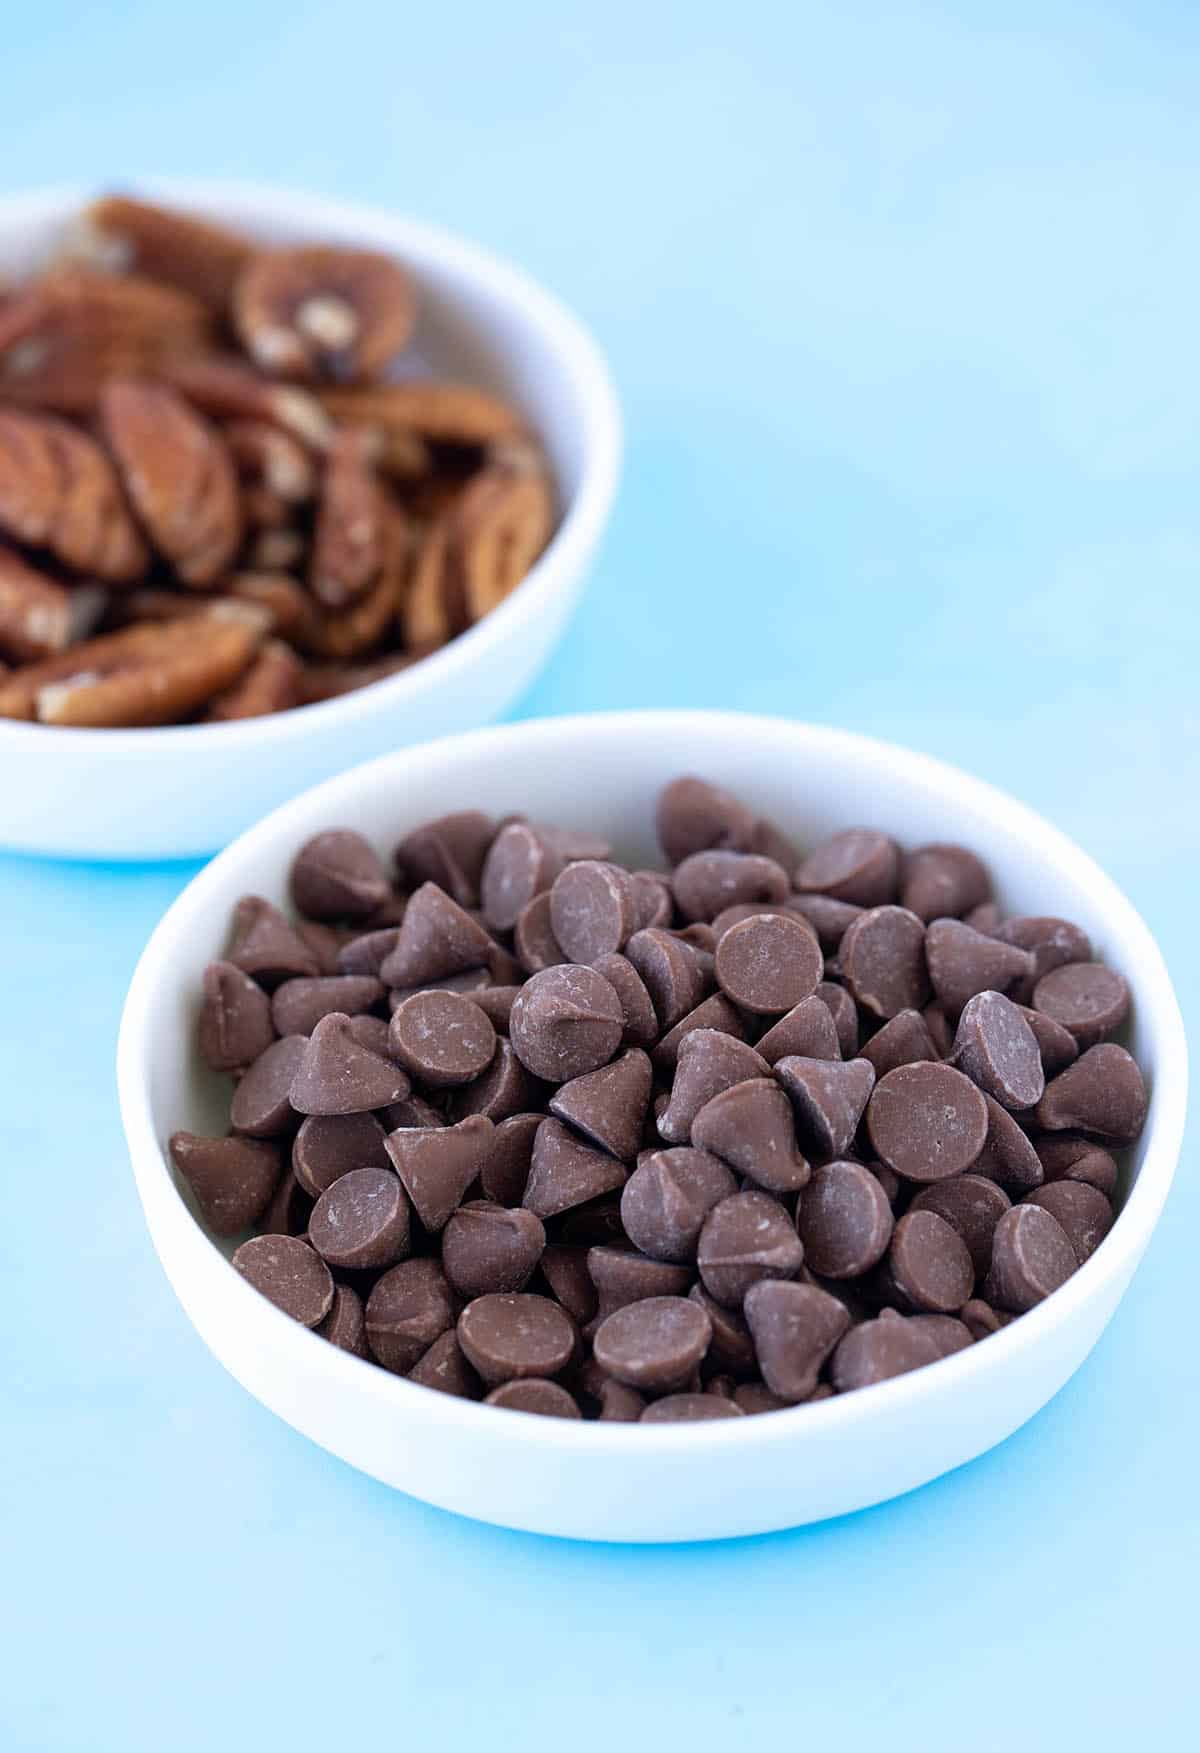 A bowl of chocolate chips and a bowl of pecans